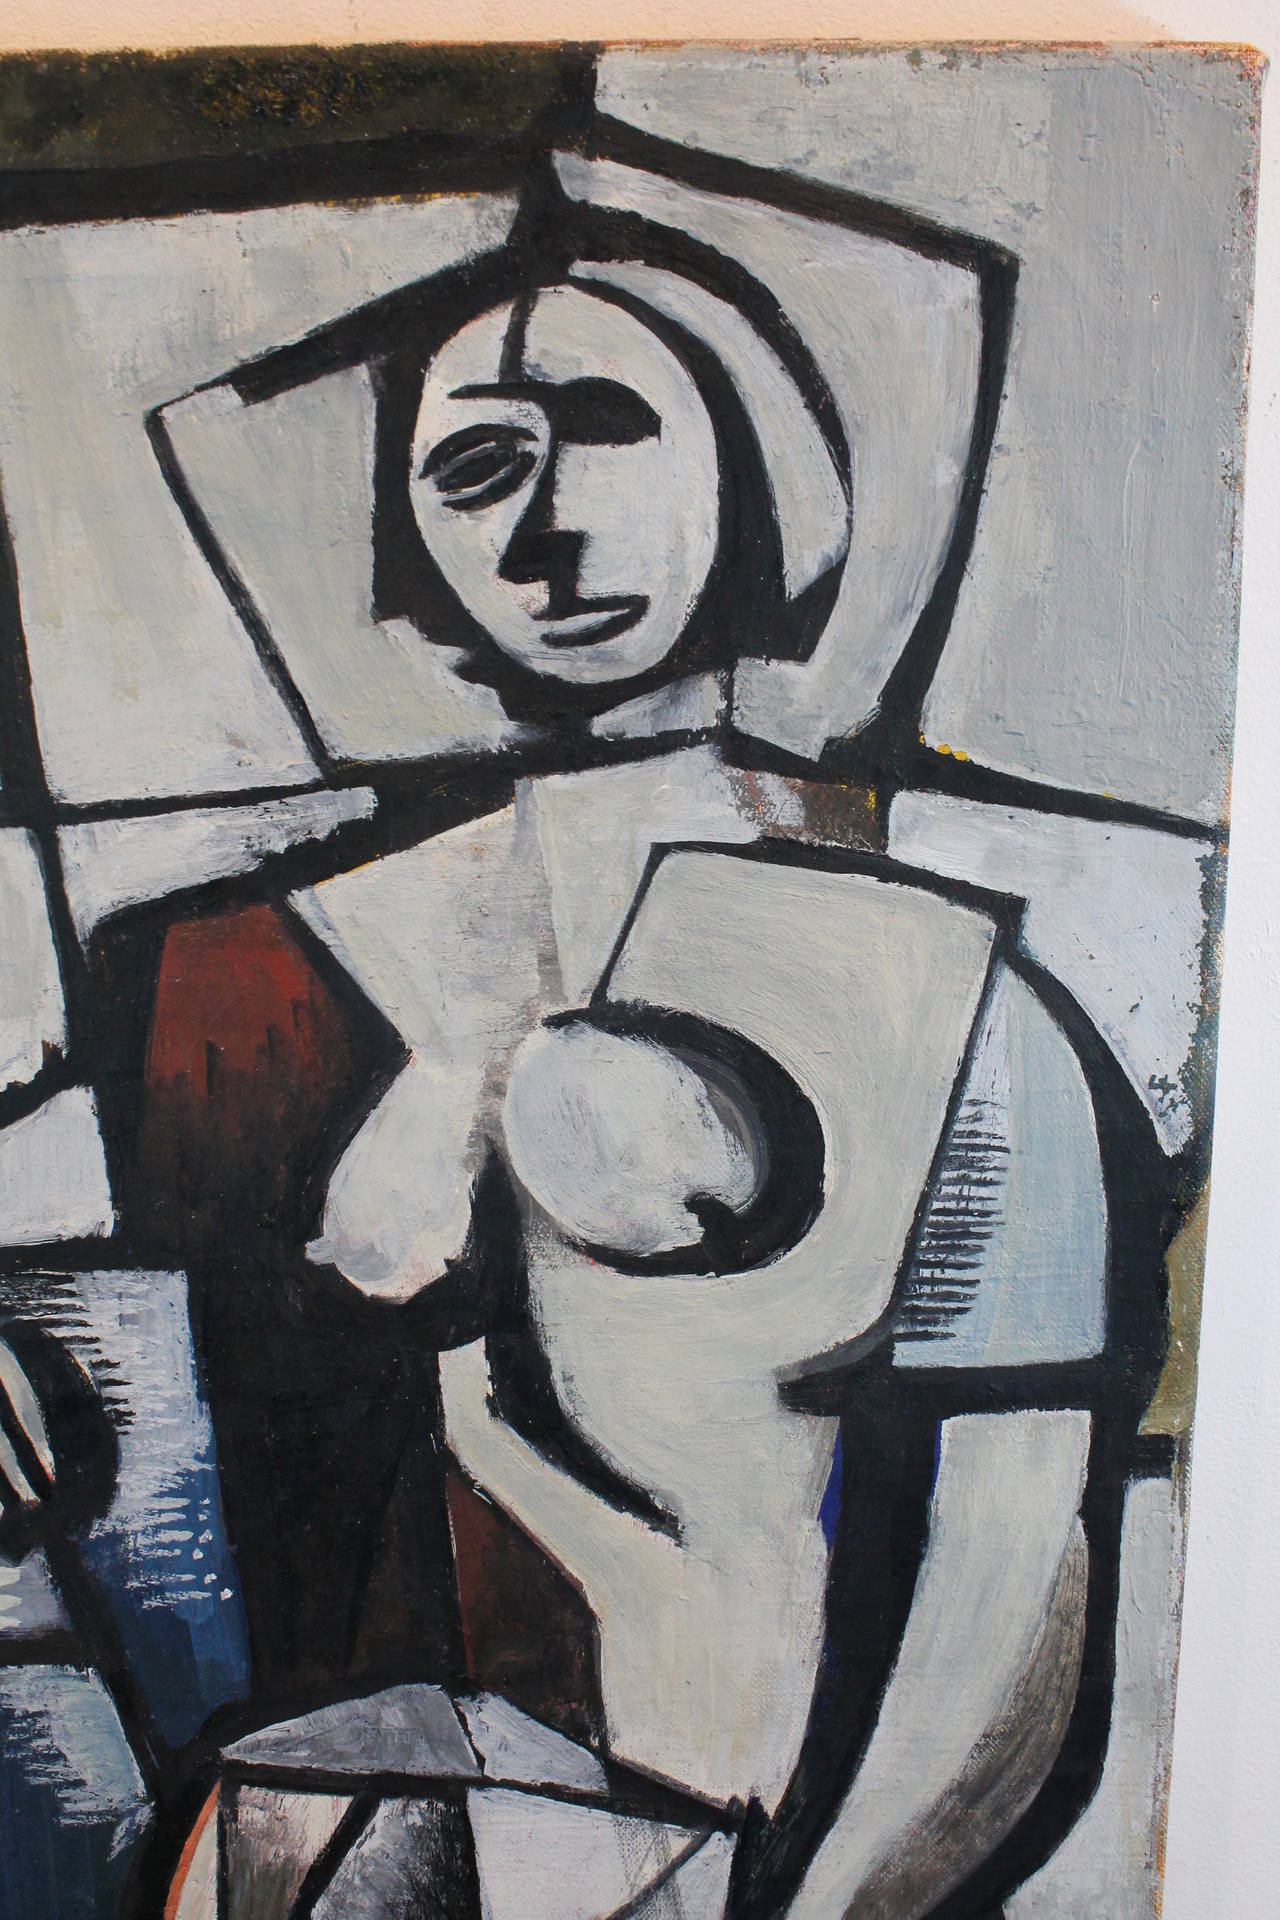 Cubist Inspired Figurative Oil on Canvas In Excellent Condition For Sale In 3 Oaks, MI